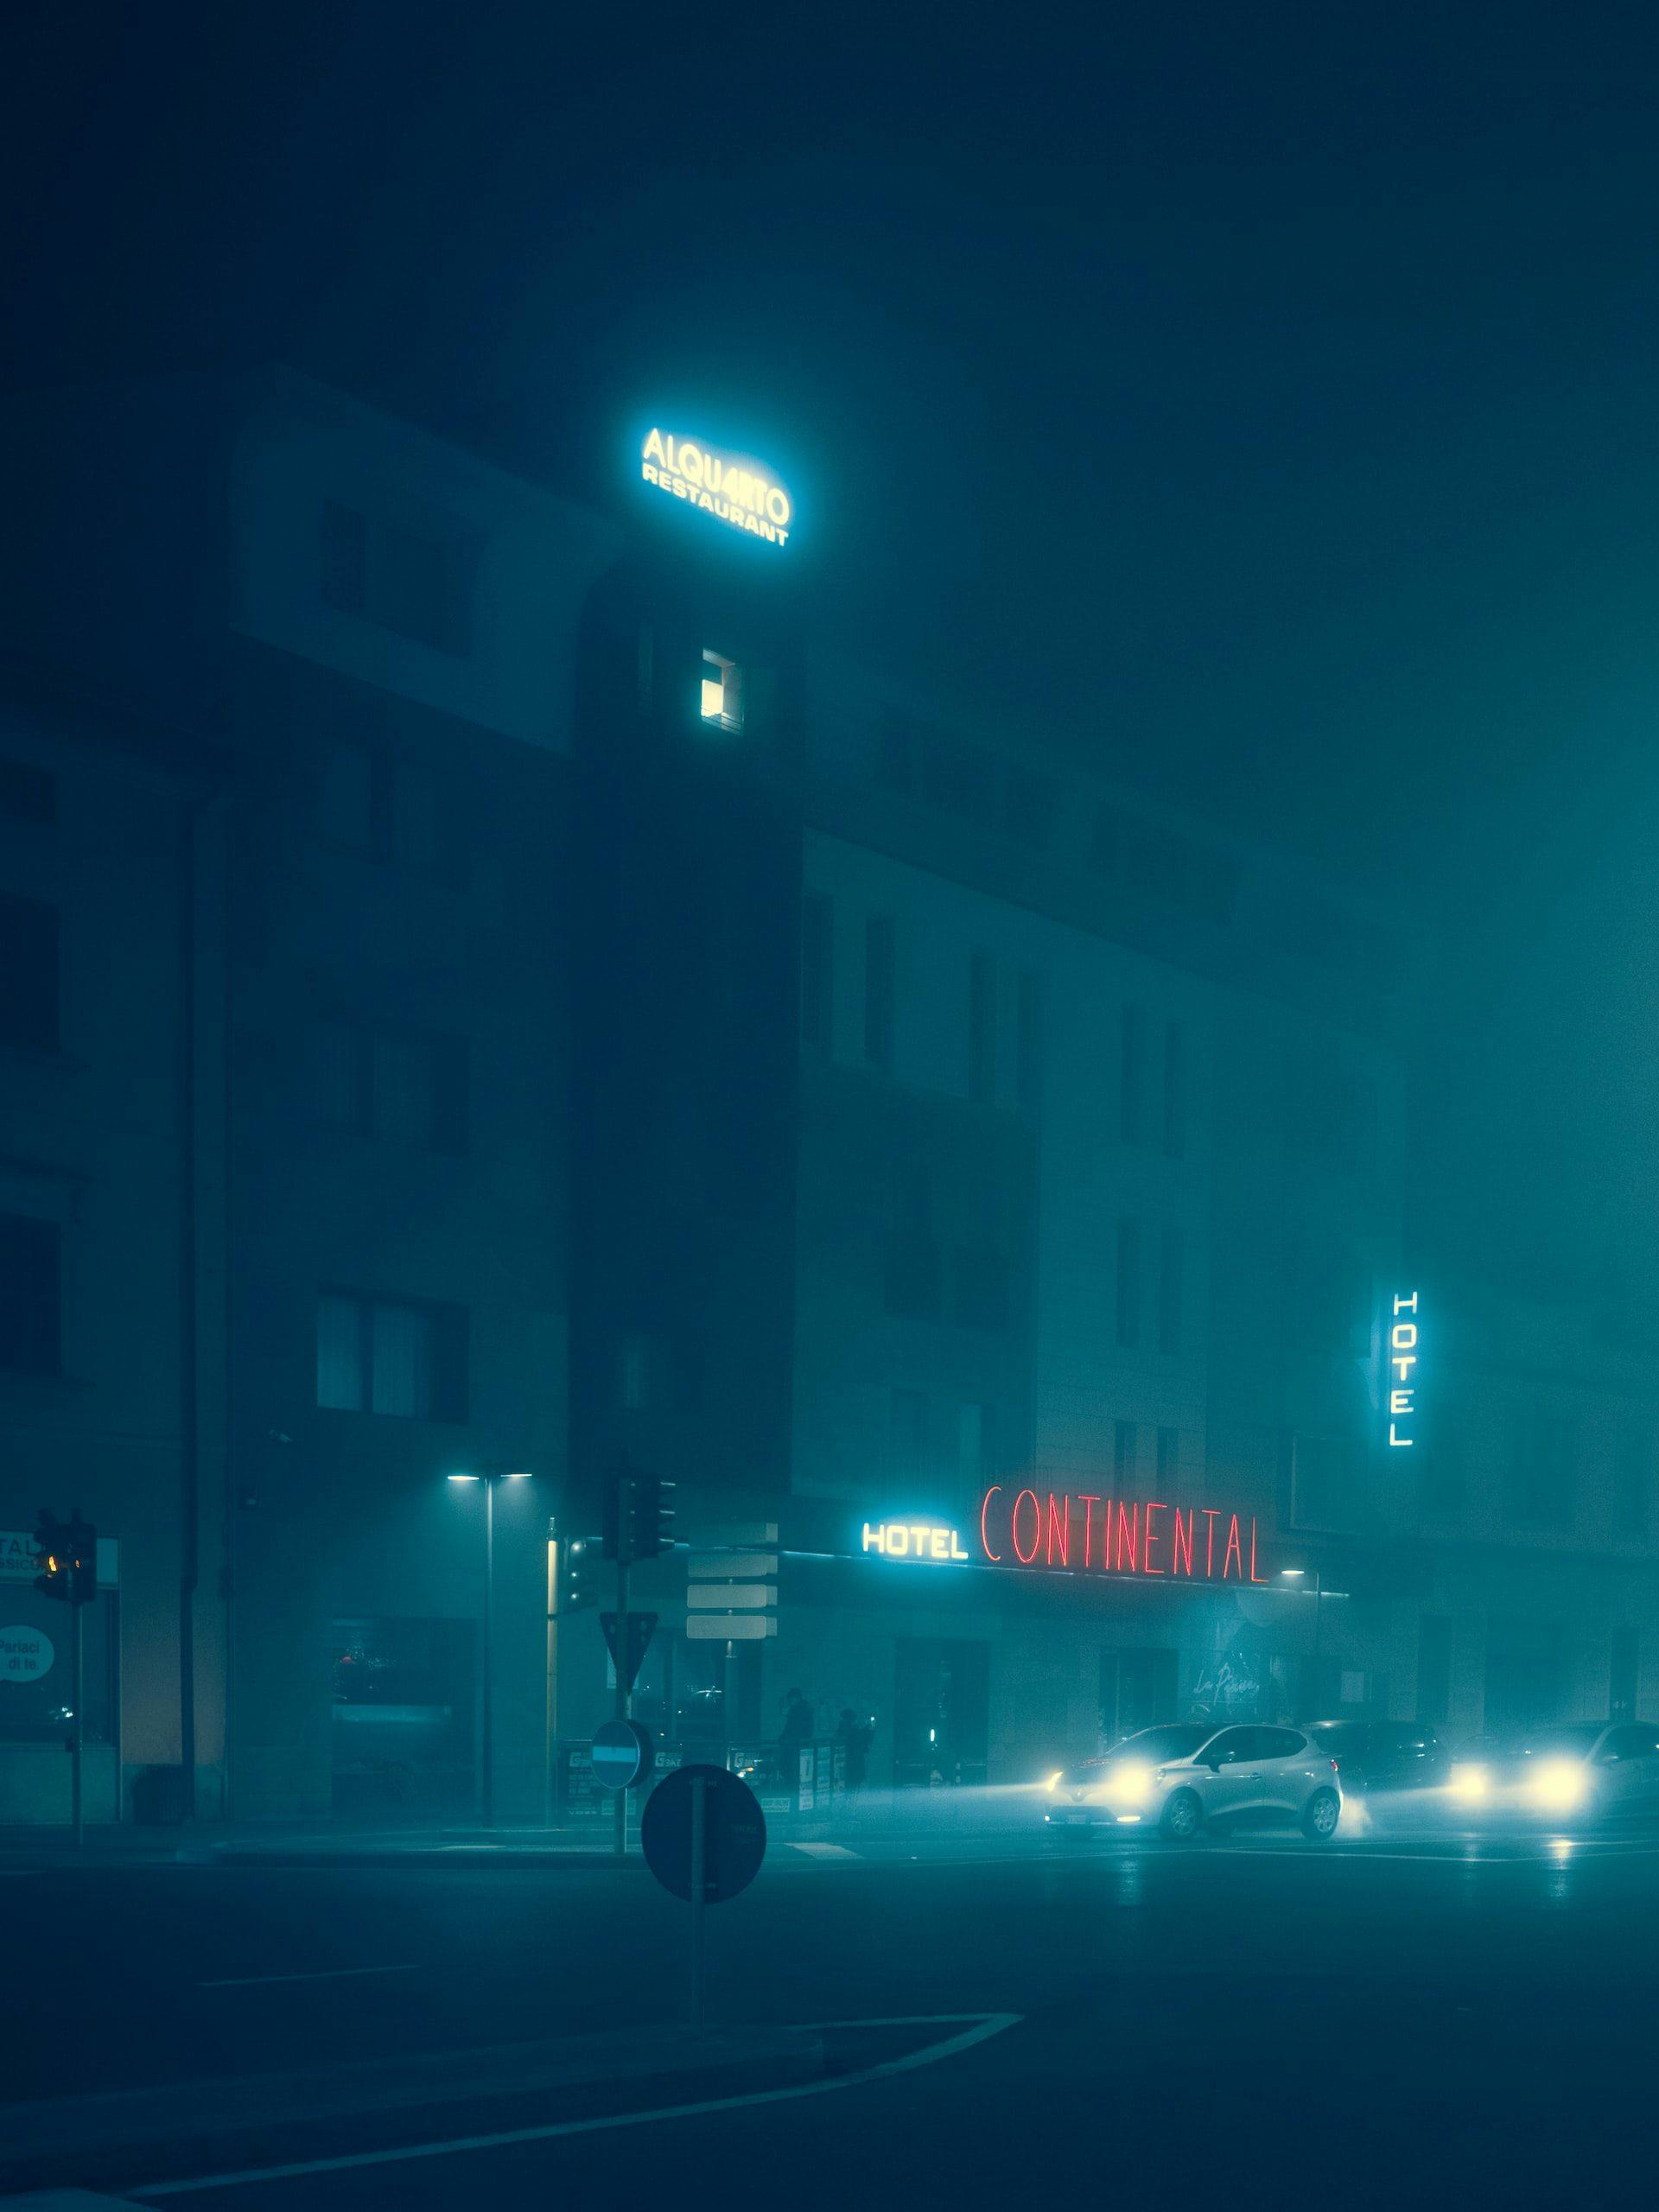 Foggy night with hotel neon sign in background